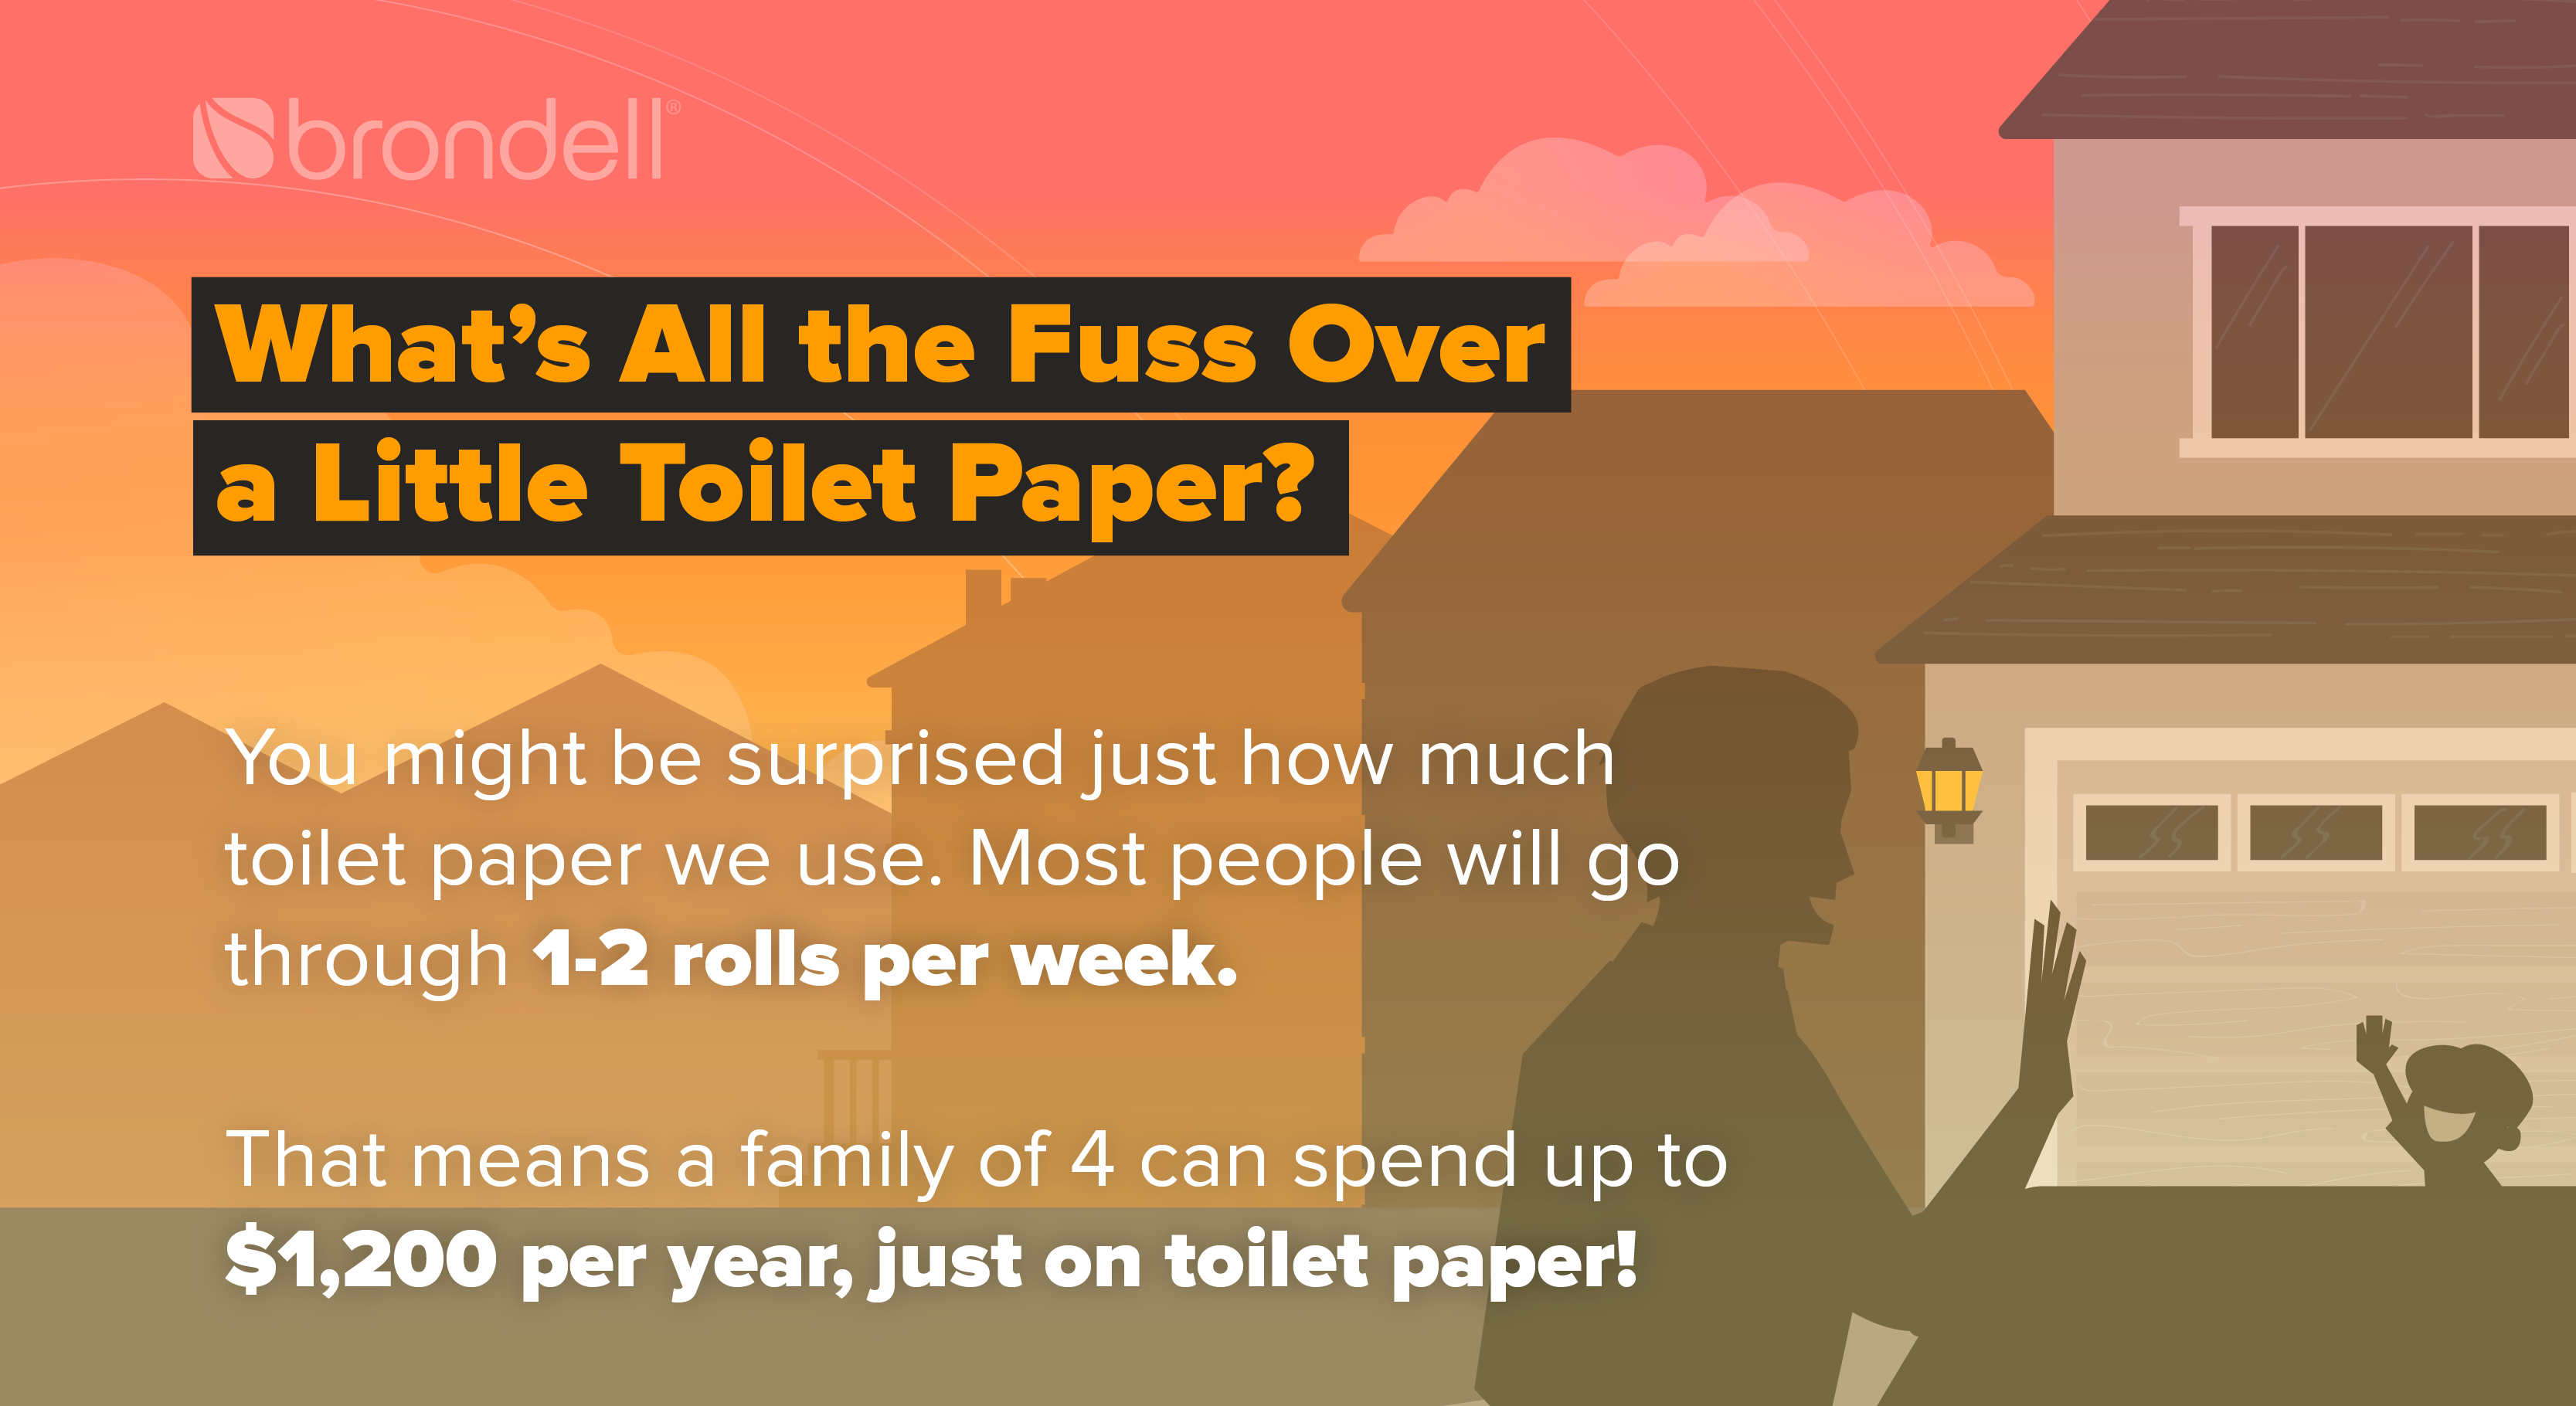 Infographic of the number of toilet paper rolls people go through per week and how much they spend on toilet paper